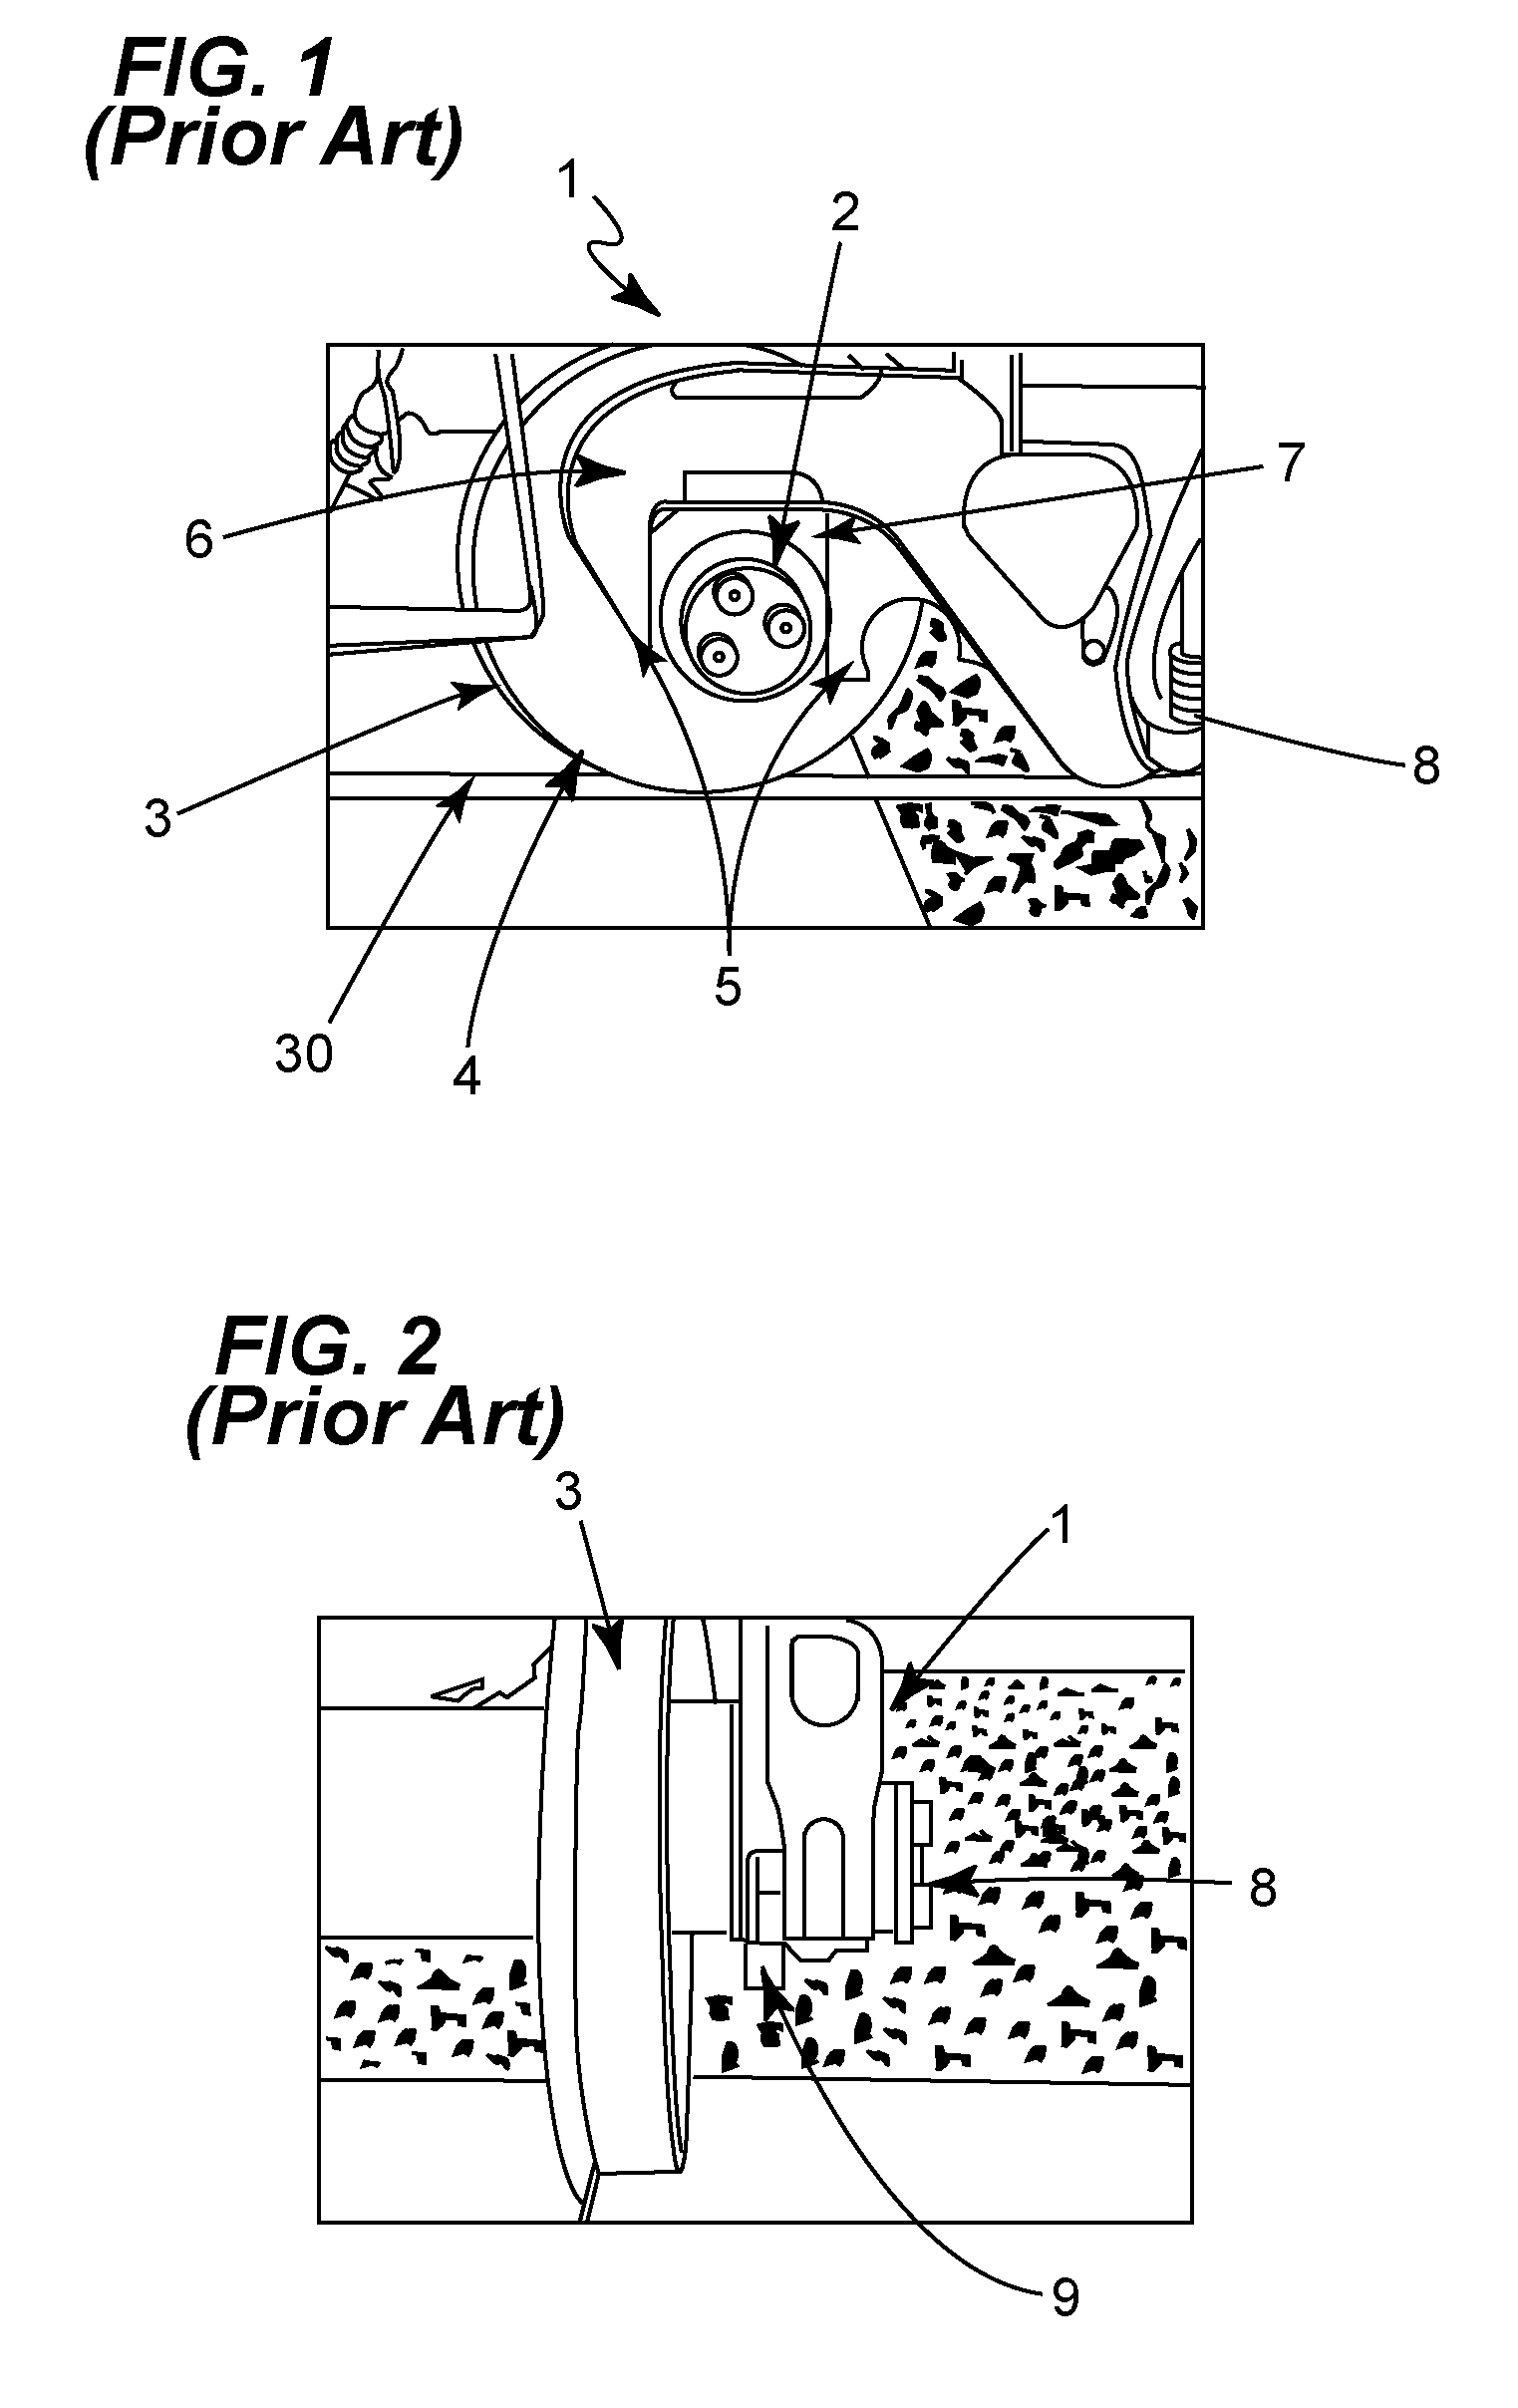 Apparatus and method for identifying a defect and/or operating characteristic of a system